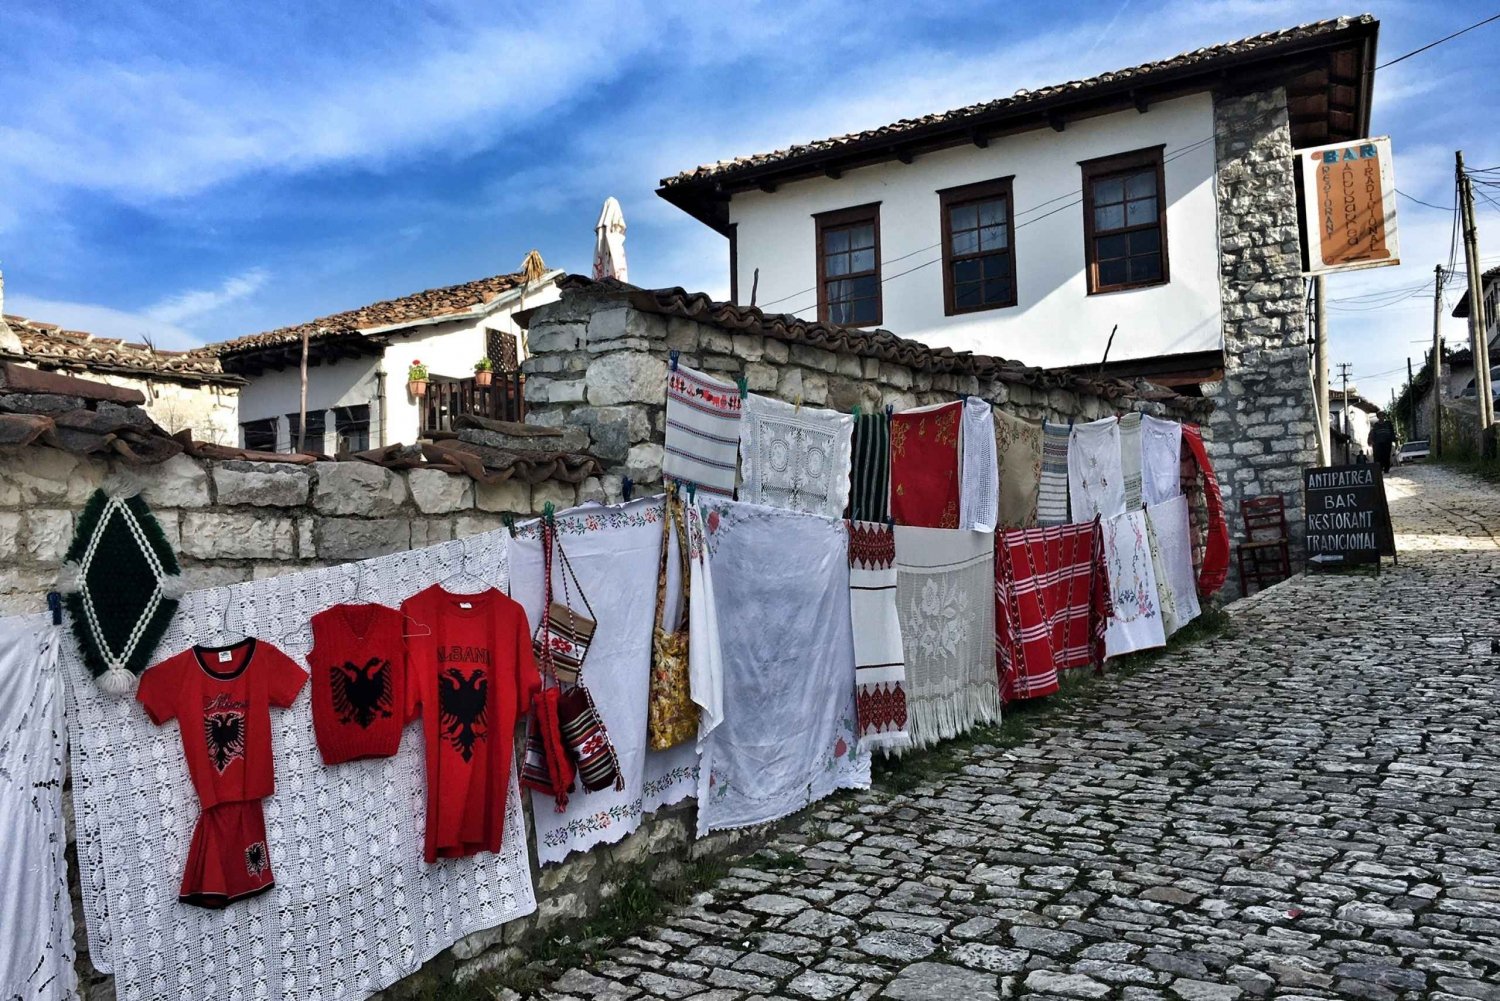 From Tirana: Private Day Trip to Apollonia and Berat